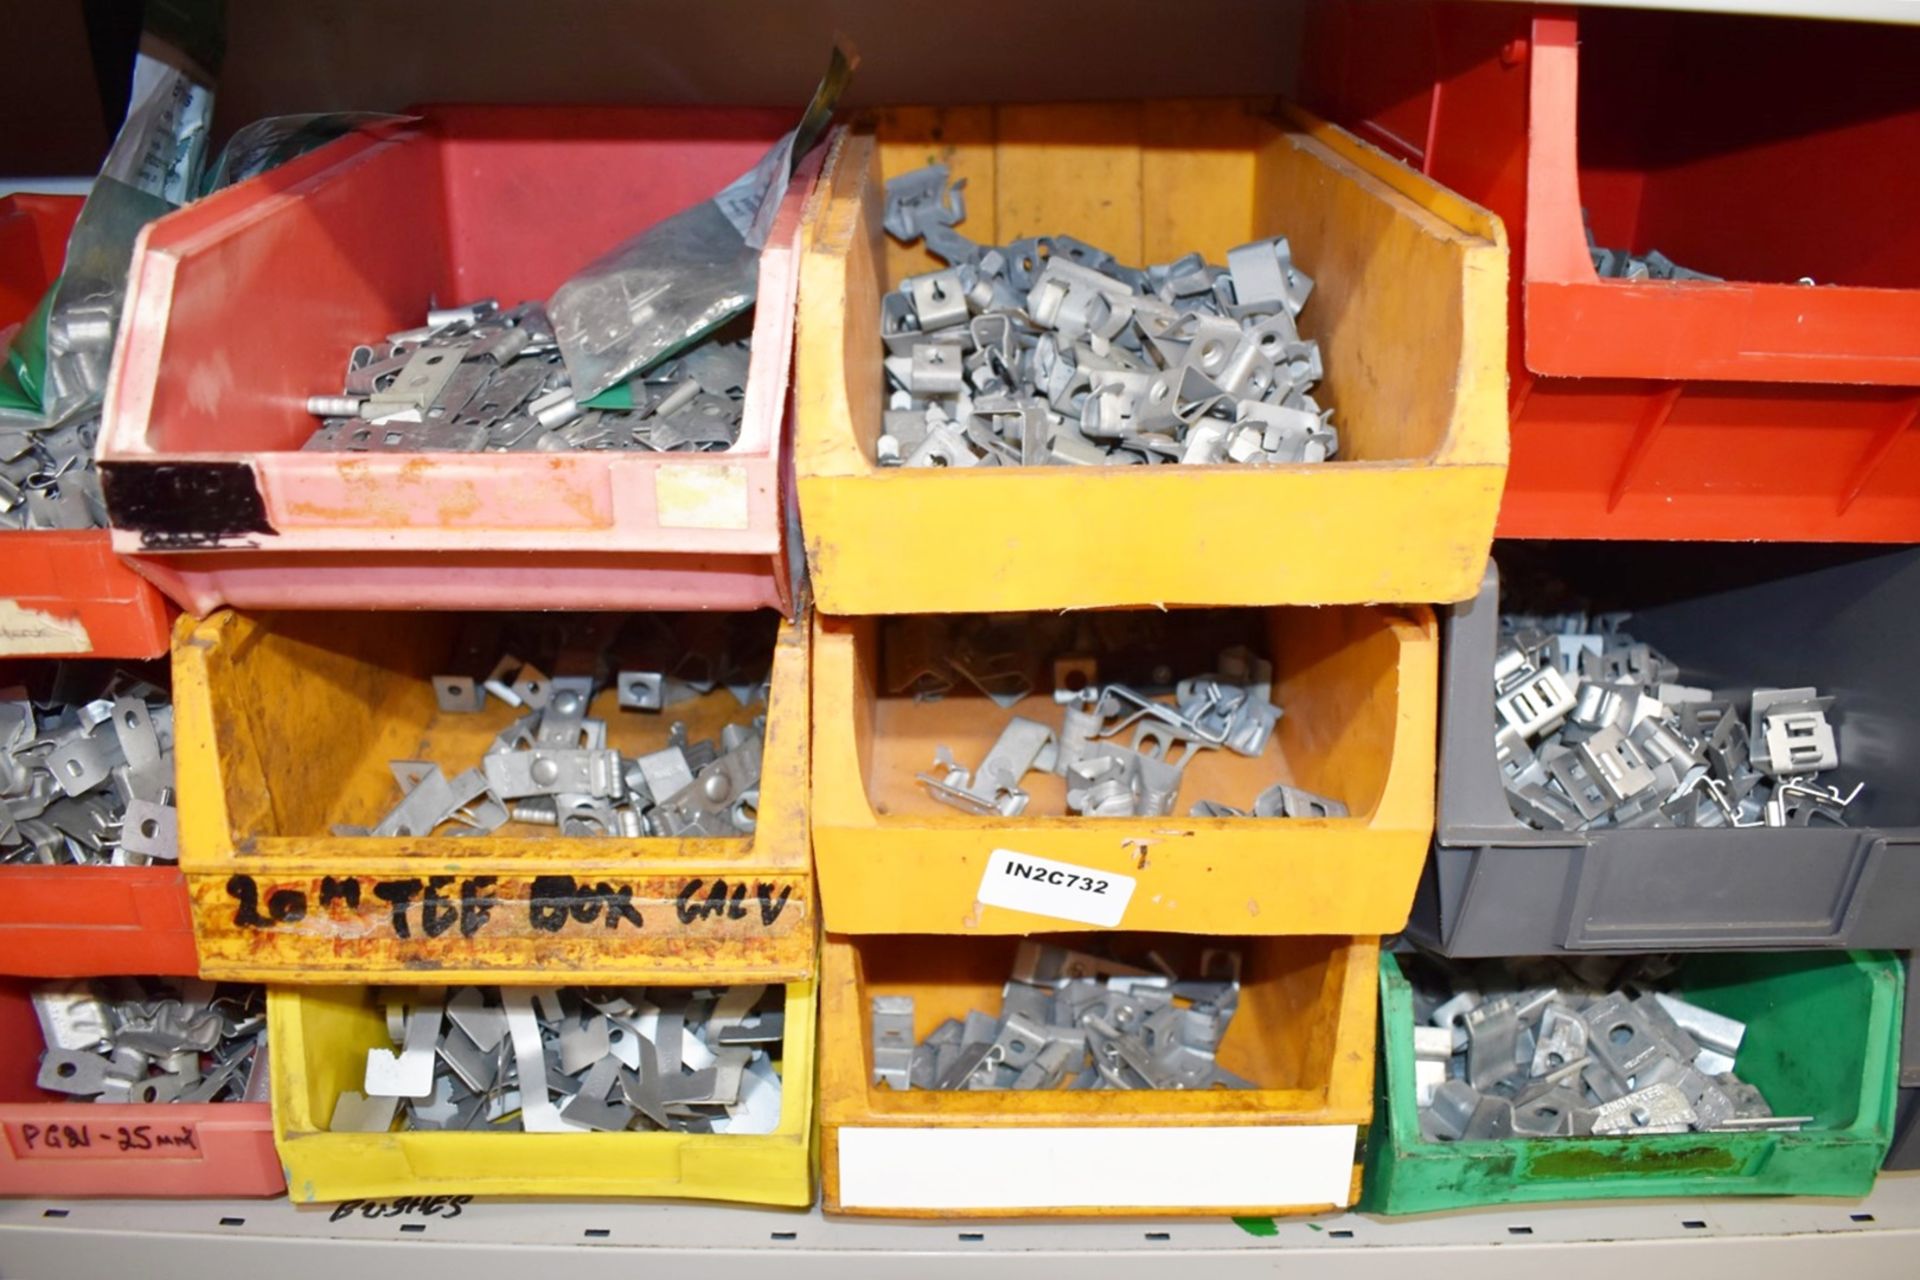 28 x Linbins With Contents & Approx 30 Boxes of Stock - Britclips, Rod Clips, Conduit Clips & More - Image 17 of 19